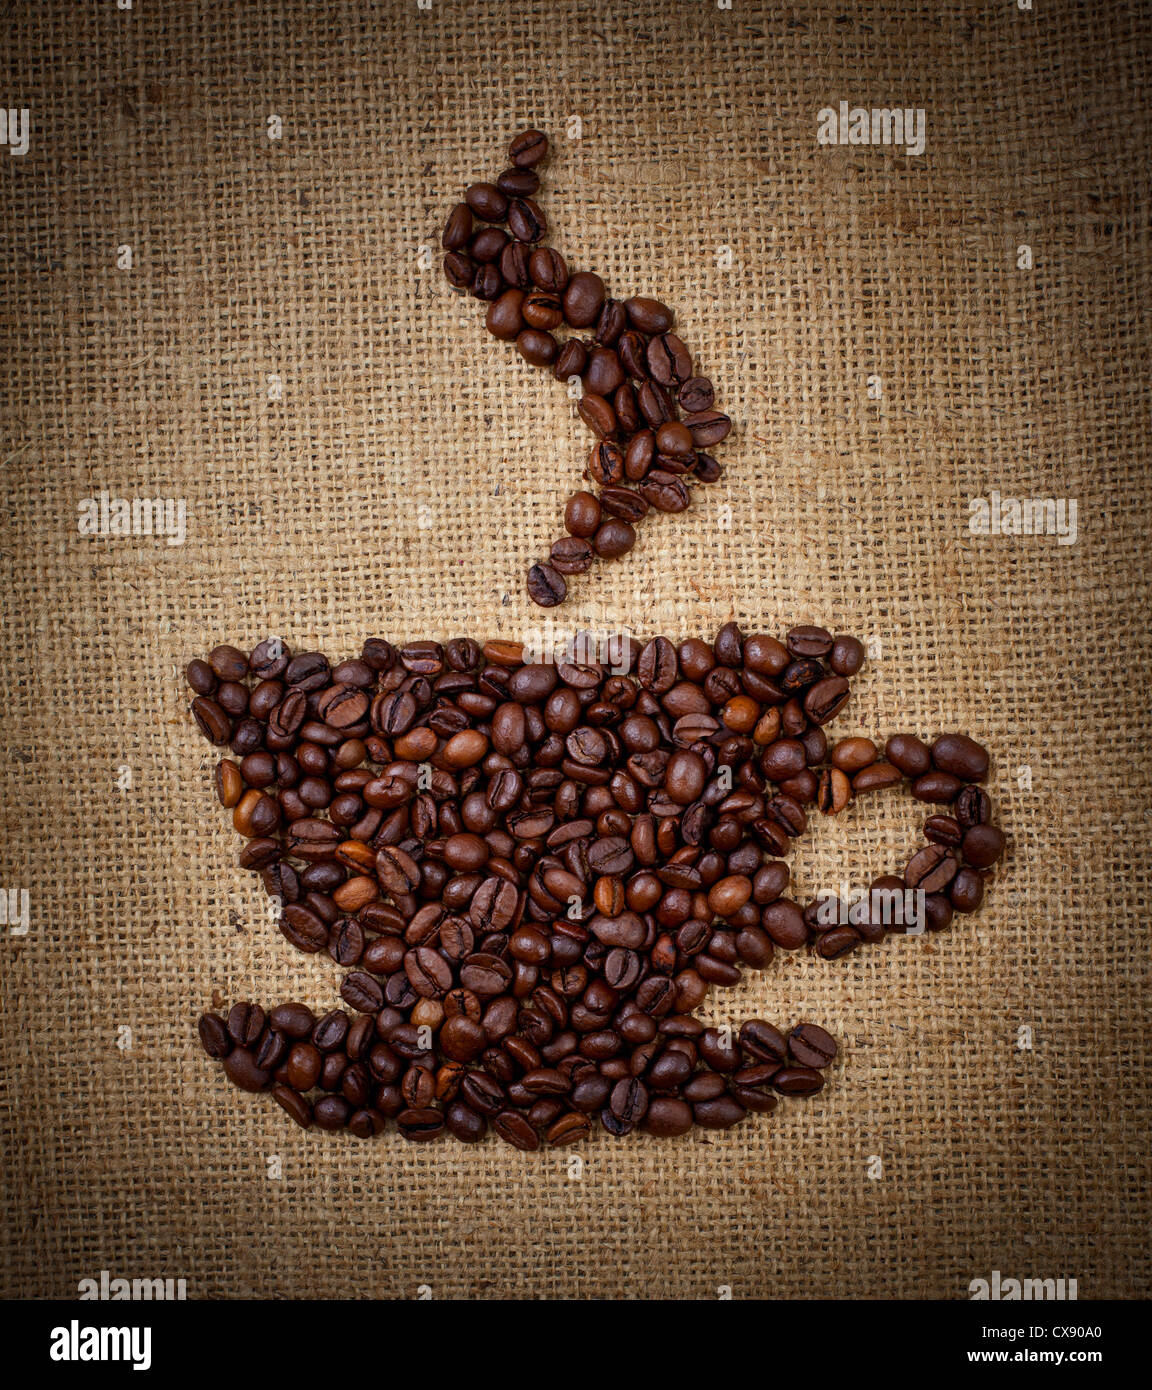 coffee cup made from beans on burlap background Stock Photo